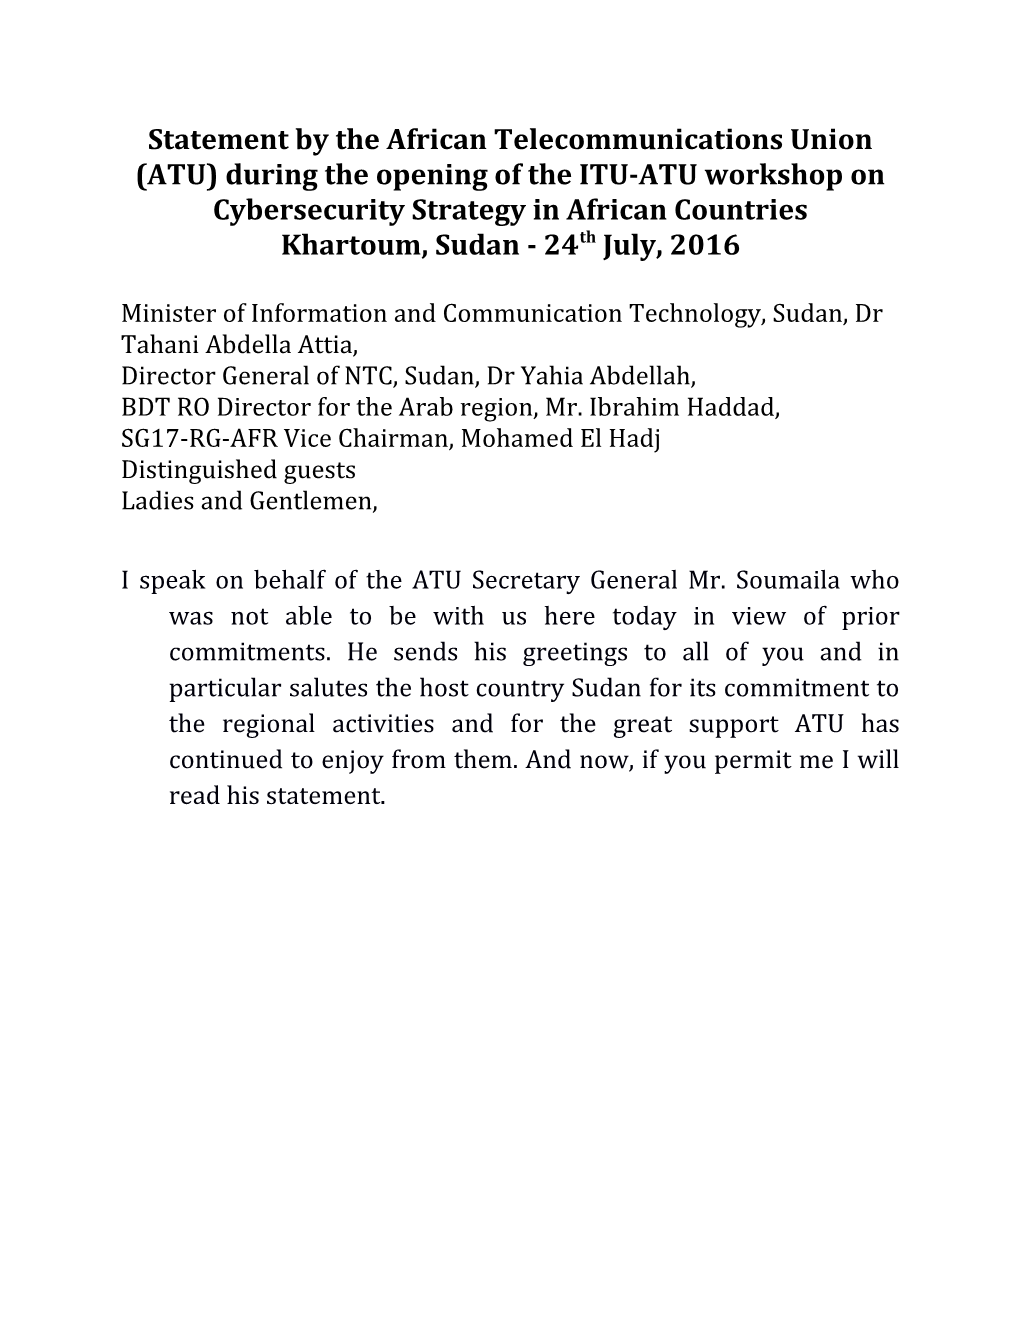 Statement by the African Telecommunications Union (ATU) During the Opening of the ITU-ATU